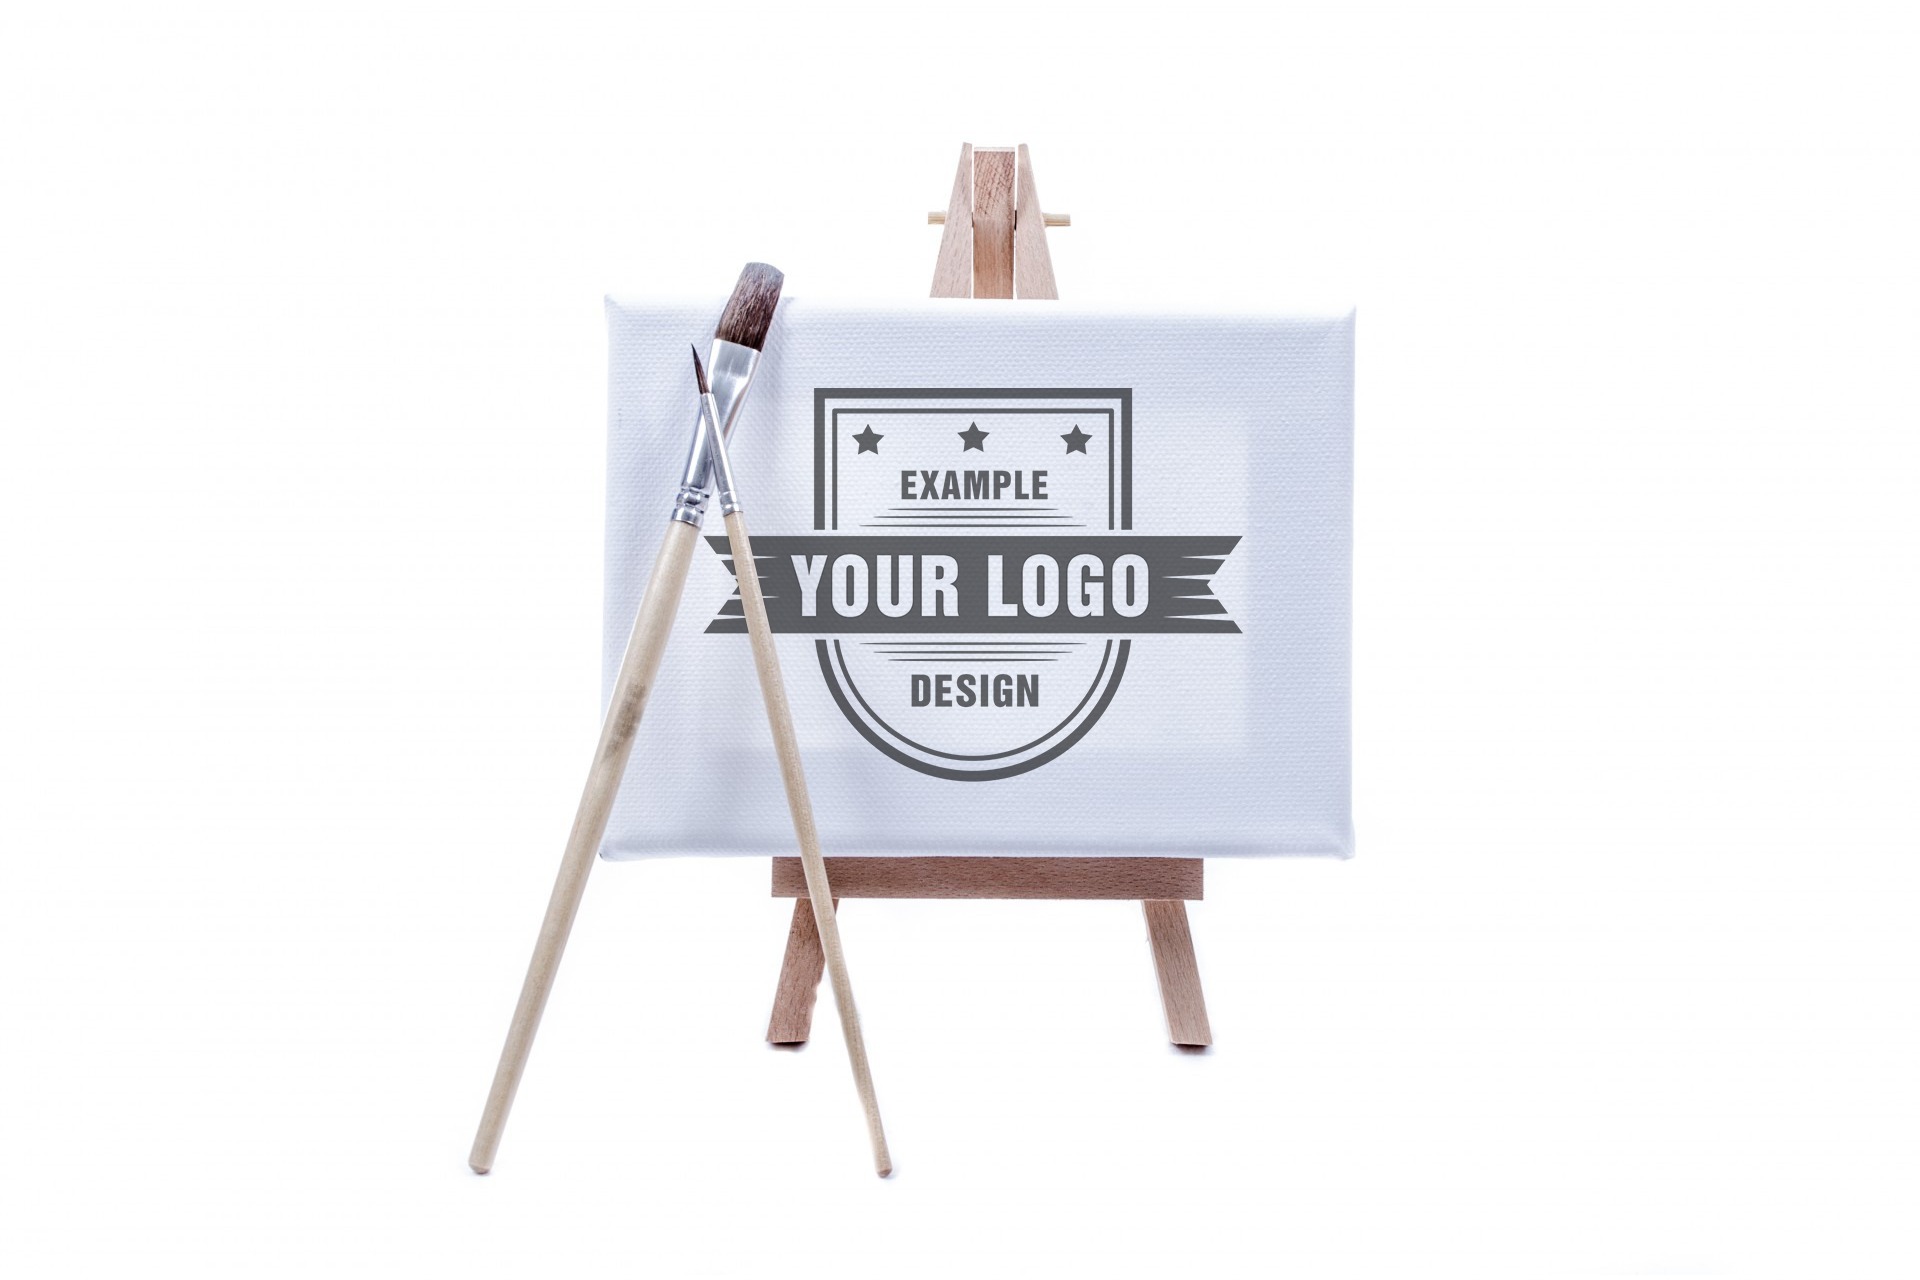 logo on easel painting creative online mockup